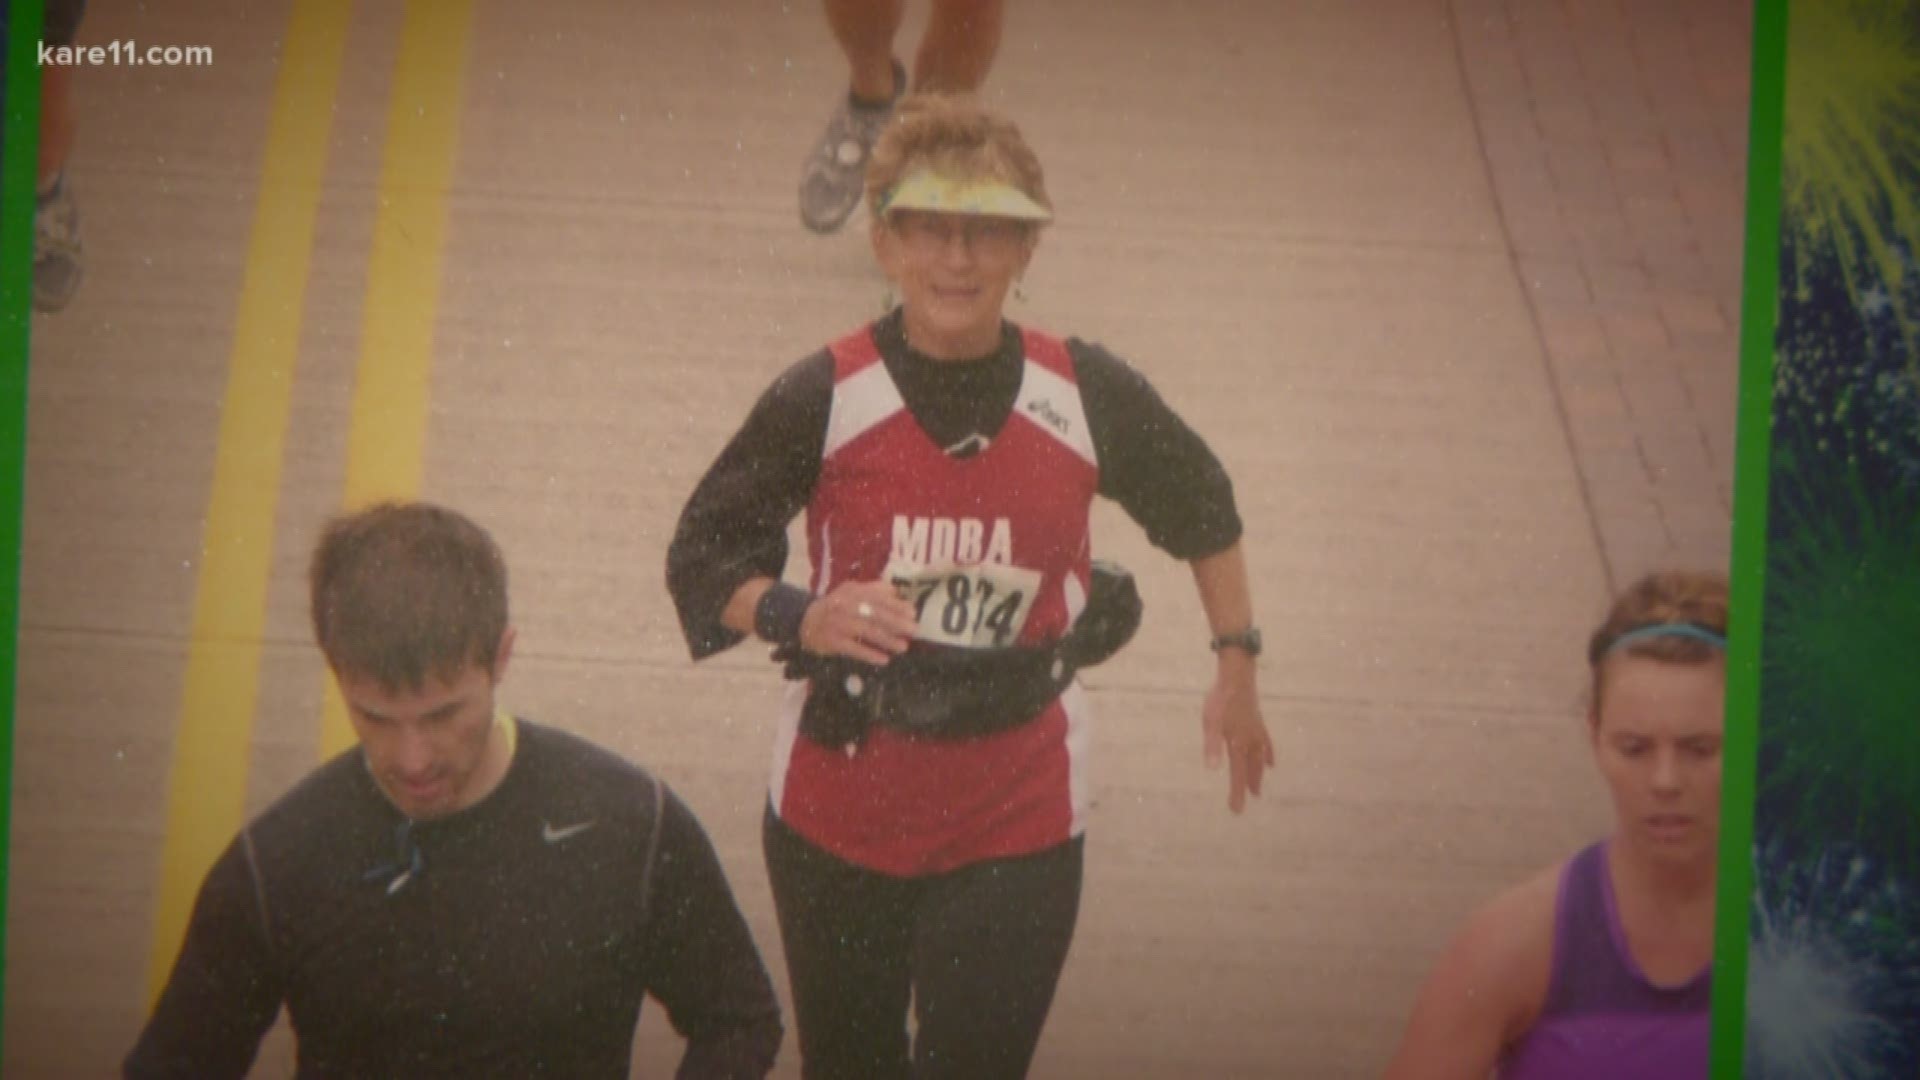 Mary Croft has run more than 200 marathons and never missed a Twin Cities Marathon.